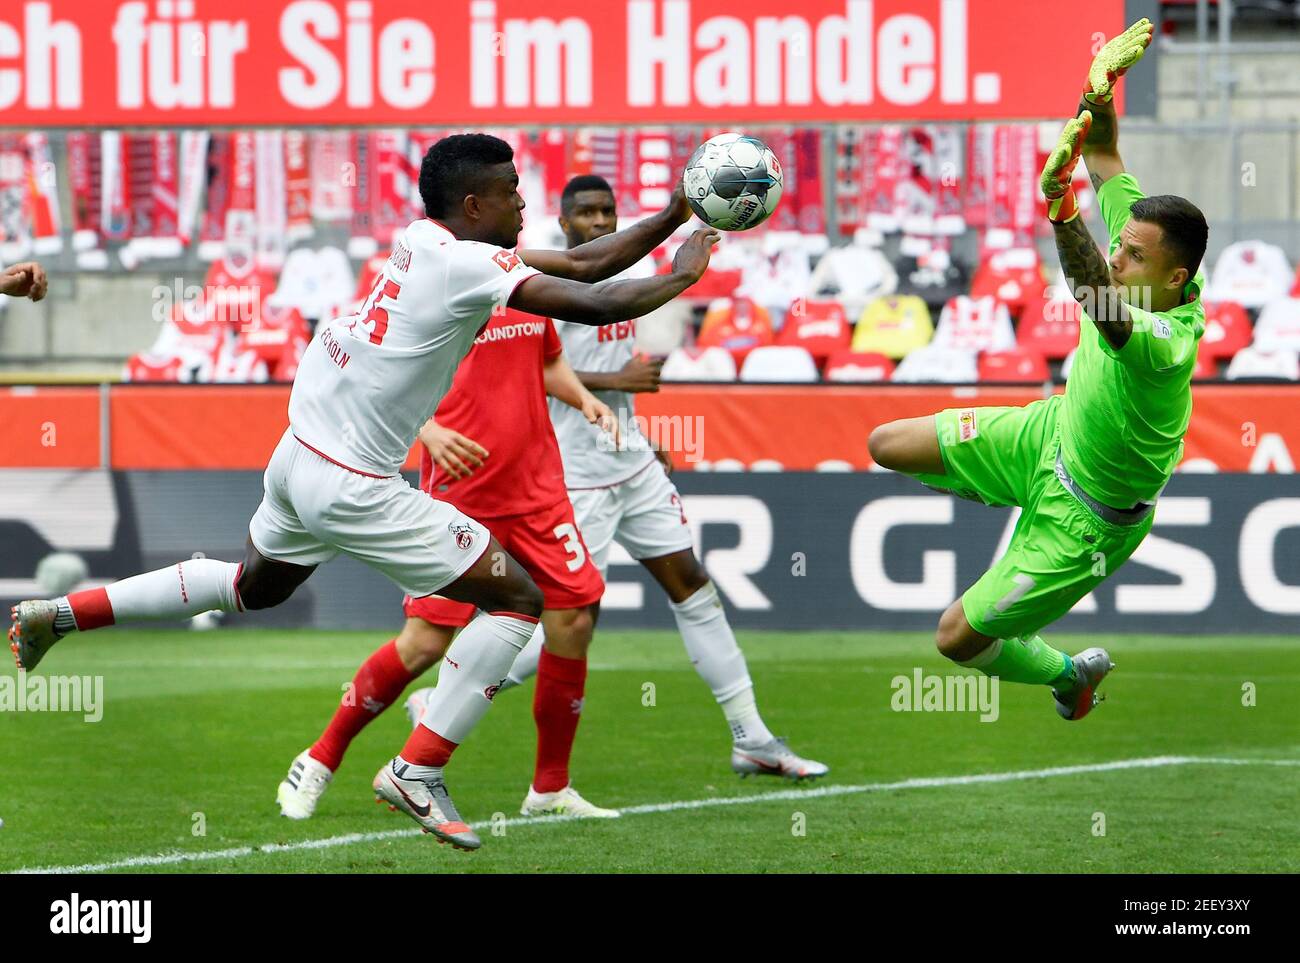 Soccer Football - Bundesliga - FC Cologne v 1. FC Union Berlin - RheinEnergieStadion, Cologne, Germany - June 13, 2020 Cologne's Jhon Cordoba in action with Union's Rafal Gikiewicz, as play resumes behind closed doors following the outbreak of the coronavirus disease (COVID-19) Martin Meissner/Pool via REUTERS  DFL regulations prohibit any use of photographs as image sequences and/or quasi-video Stock Photo